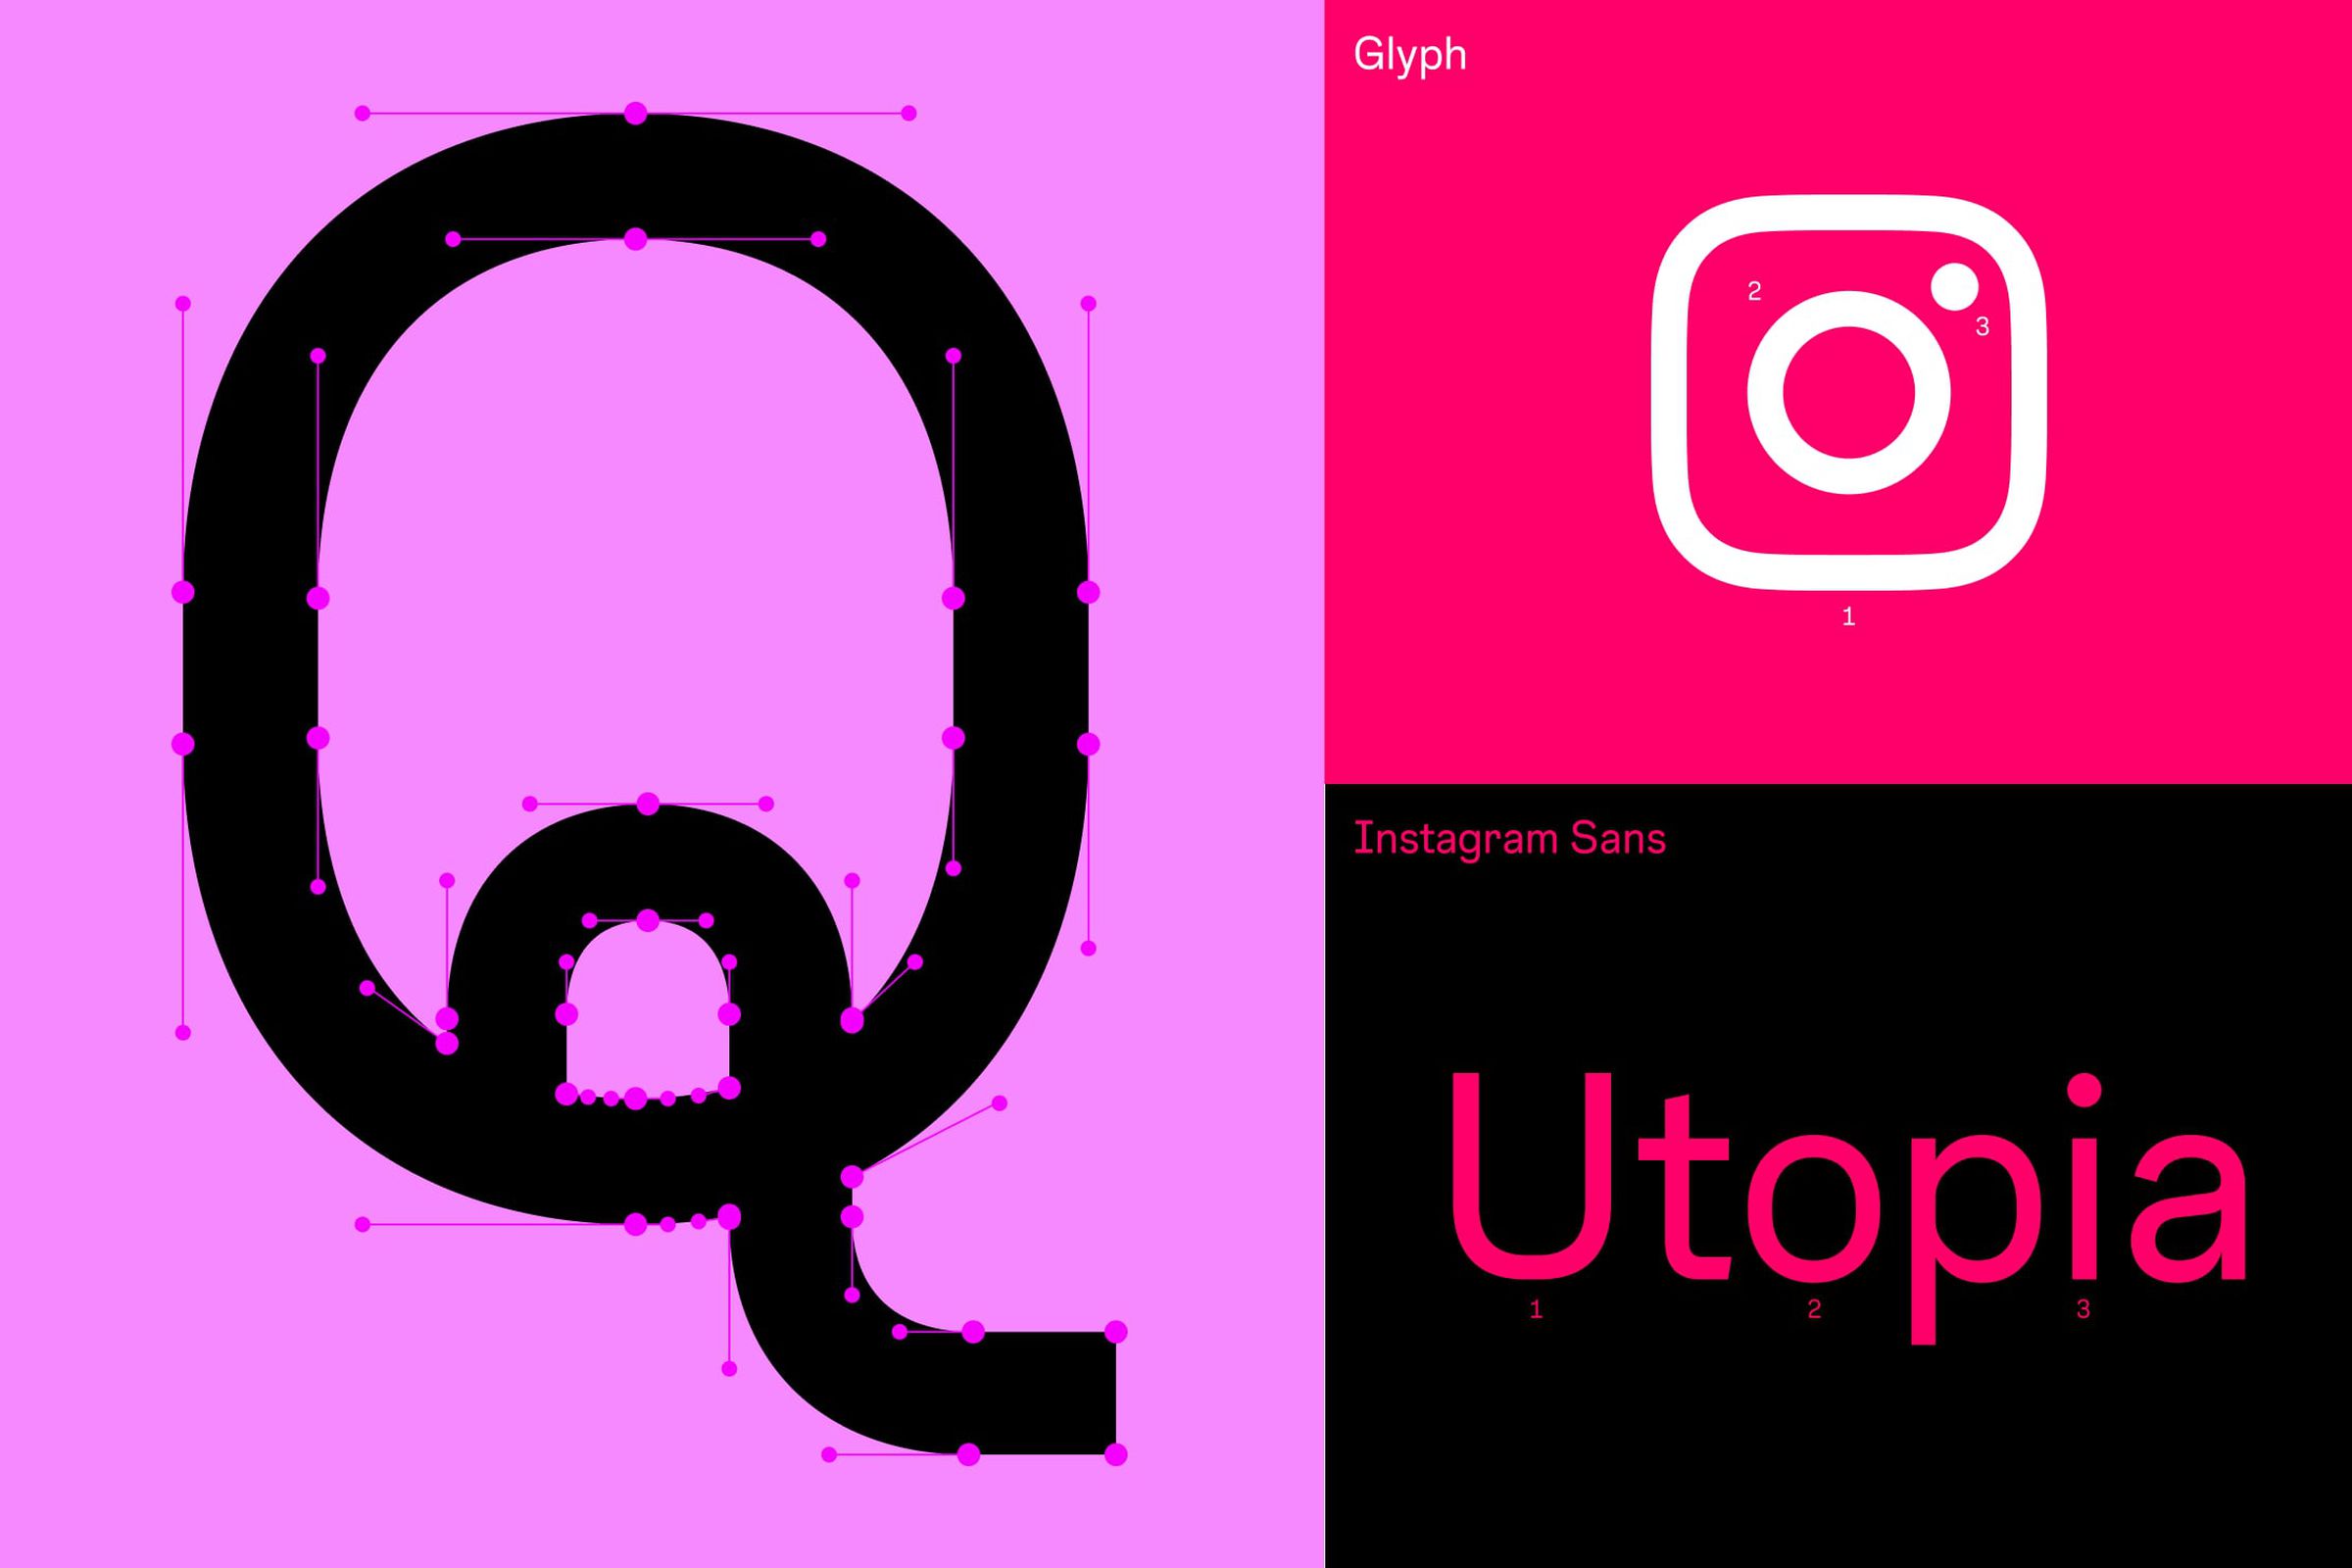 Instagram Sans is the new typeface you’ll see all over the app.